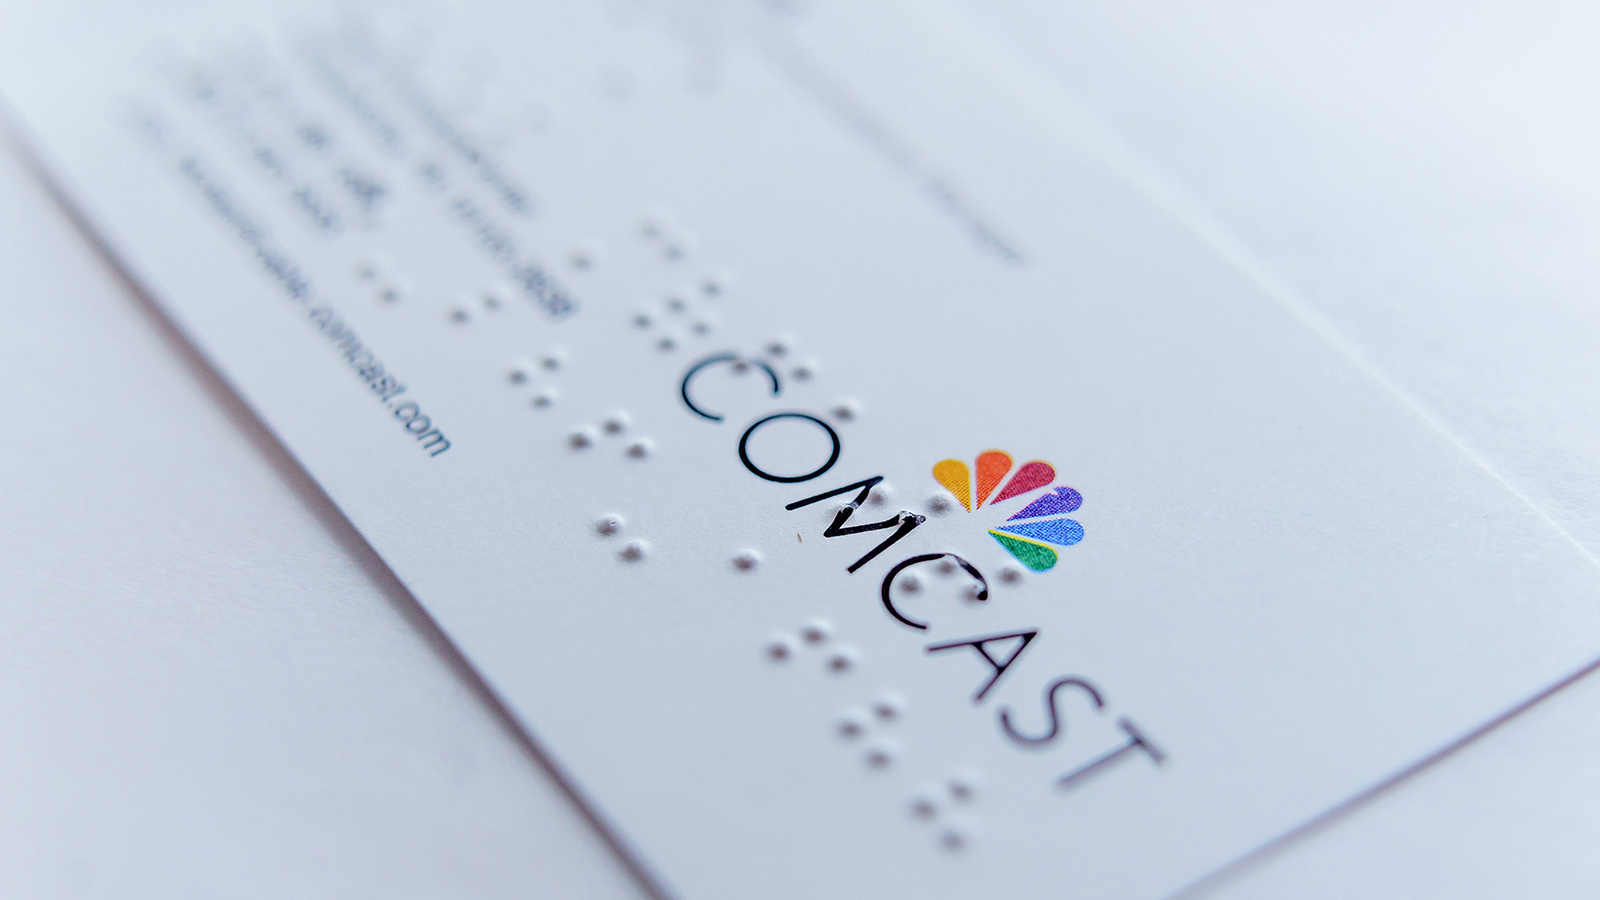 A Comcast business card covered in Braille.